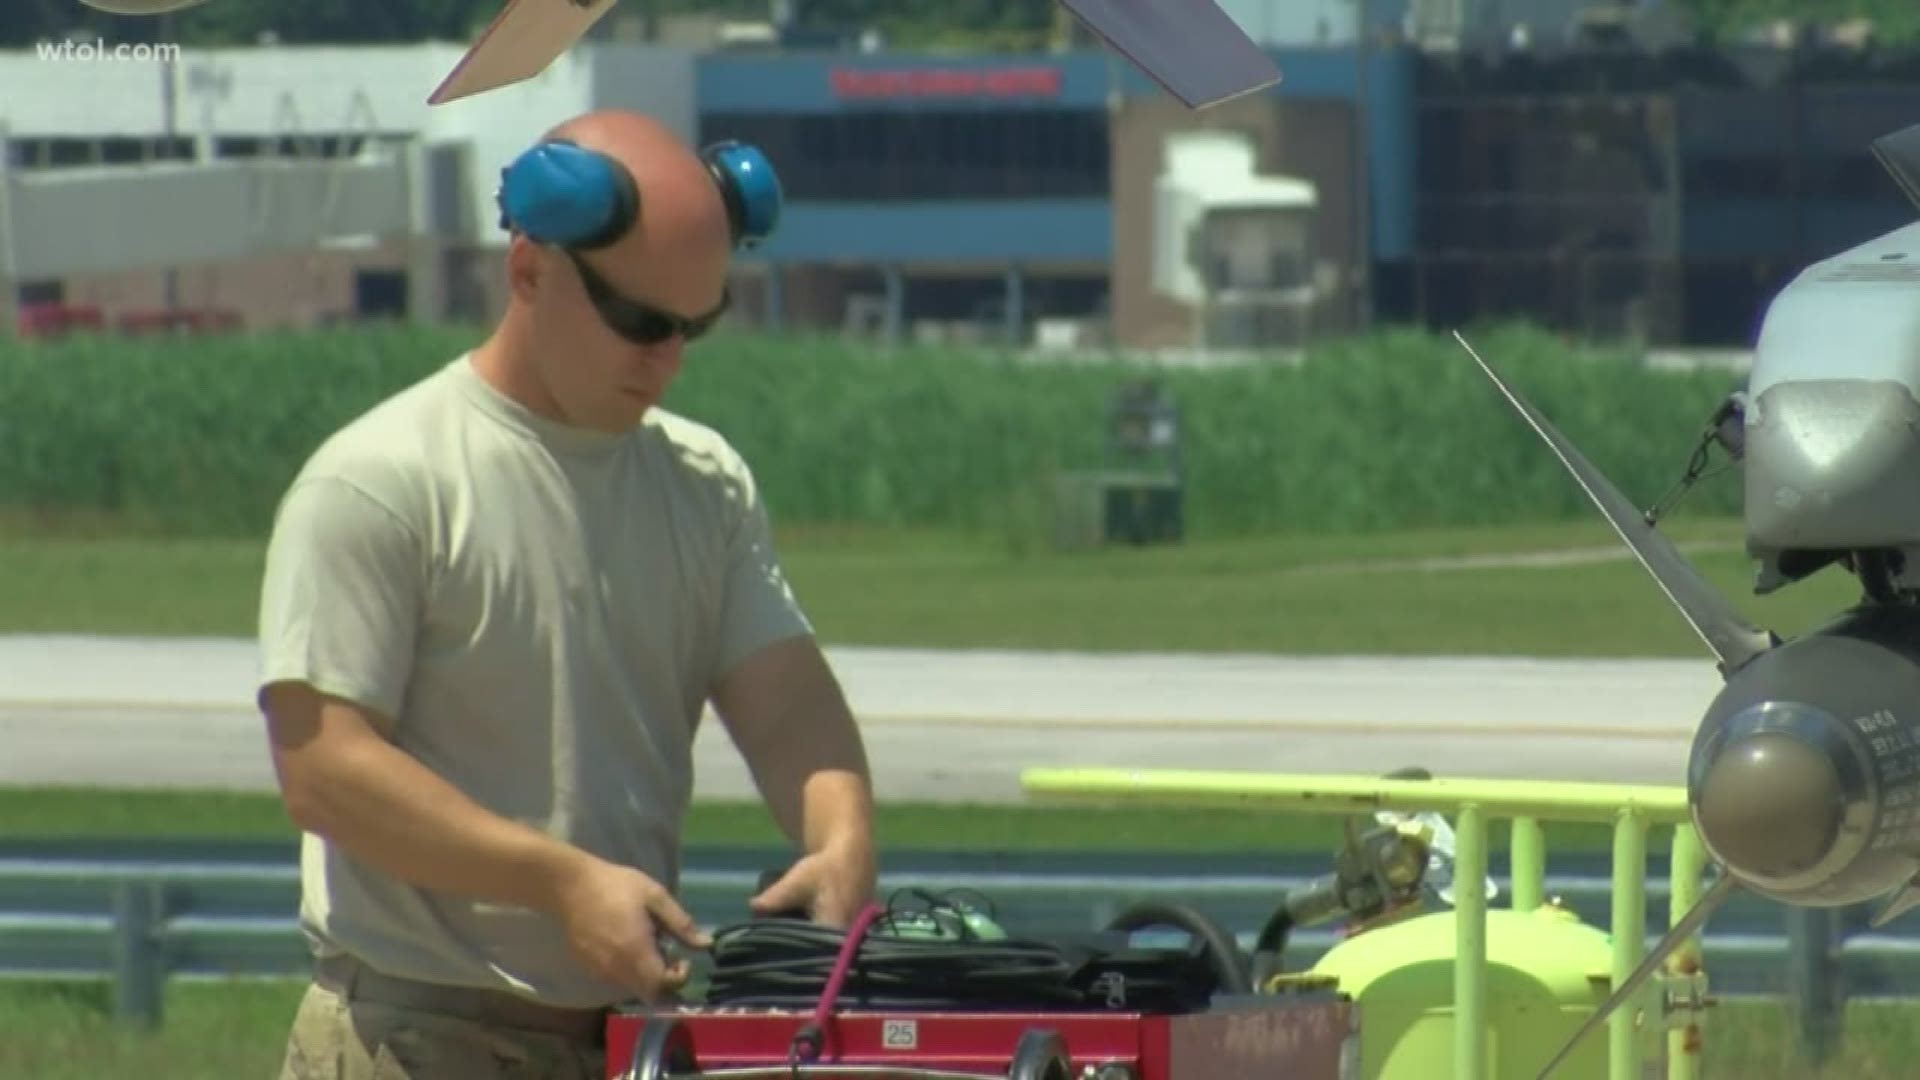 Temperatures soar this weekend, and air show officials are taking precautions to keep people safe.